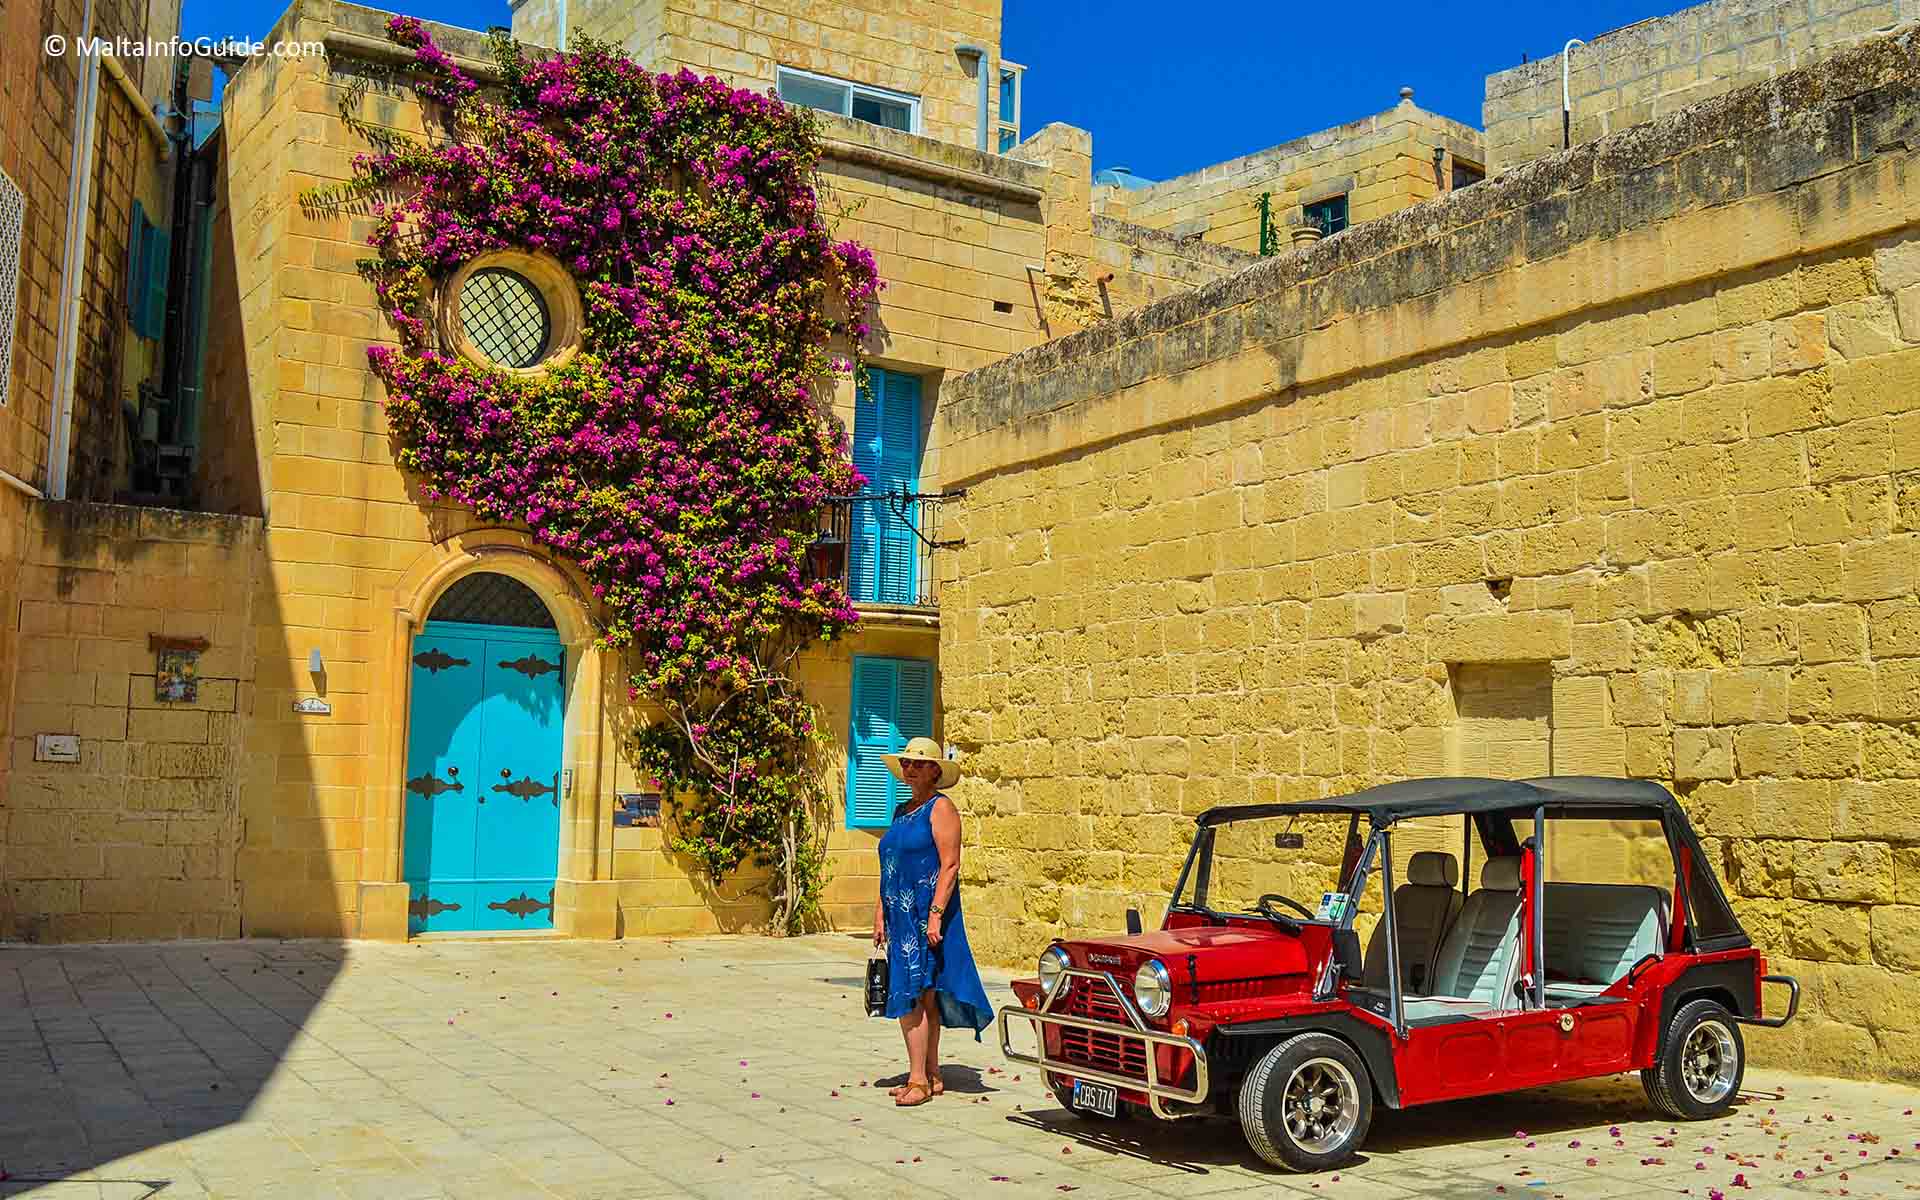 A woman posing in front of an iconic Instagramic place in Mdina.